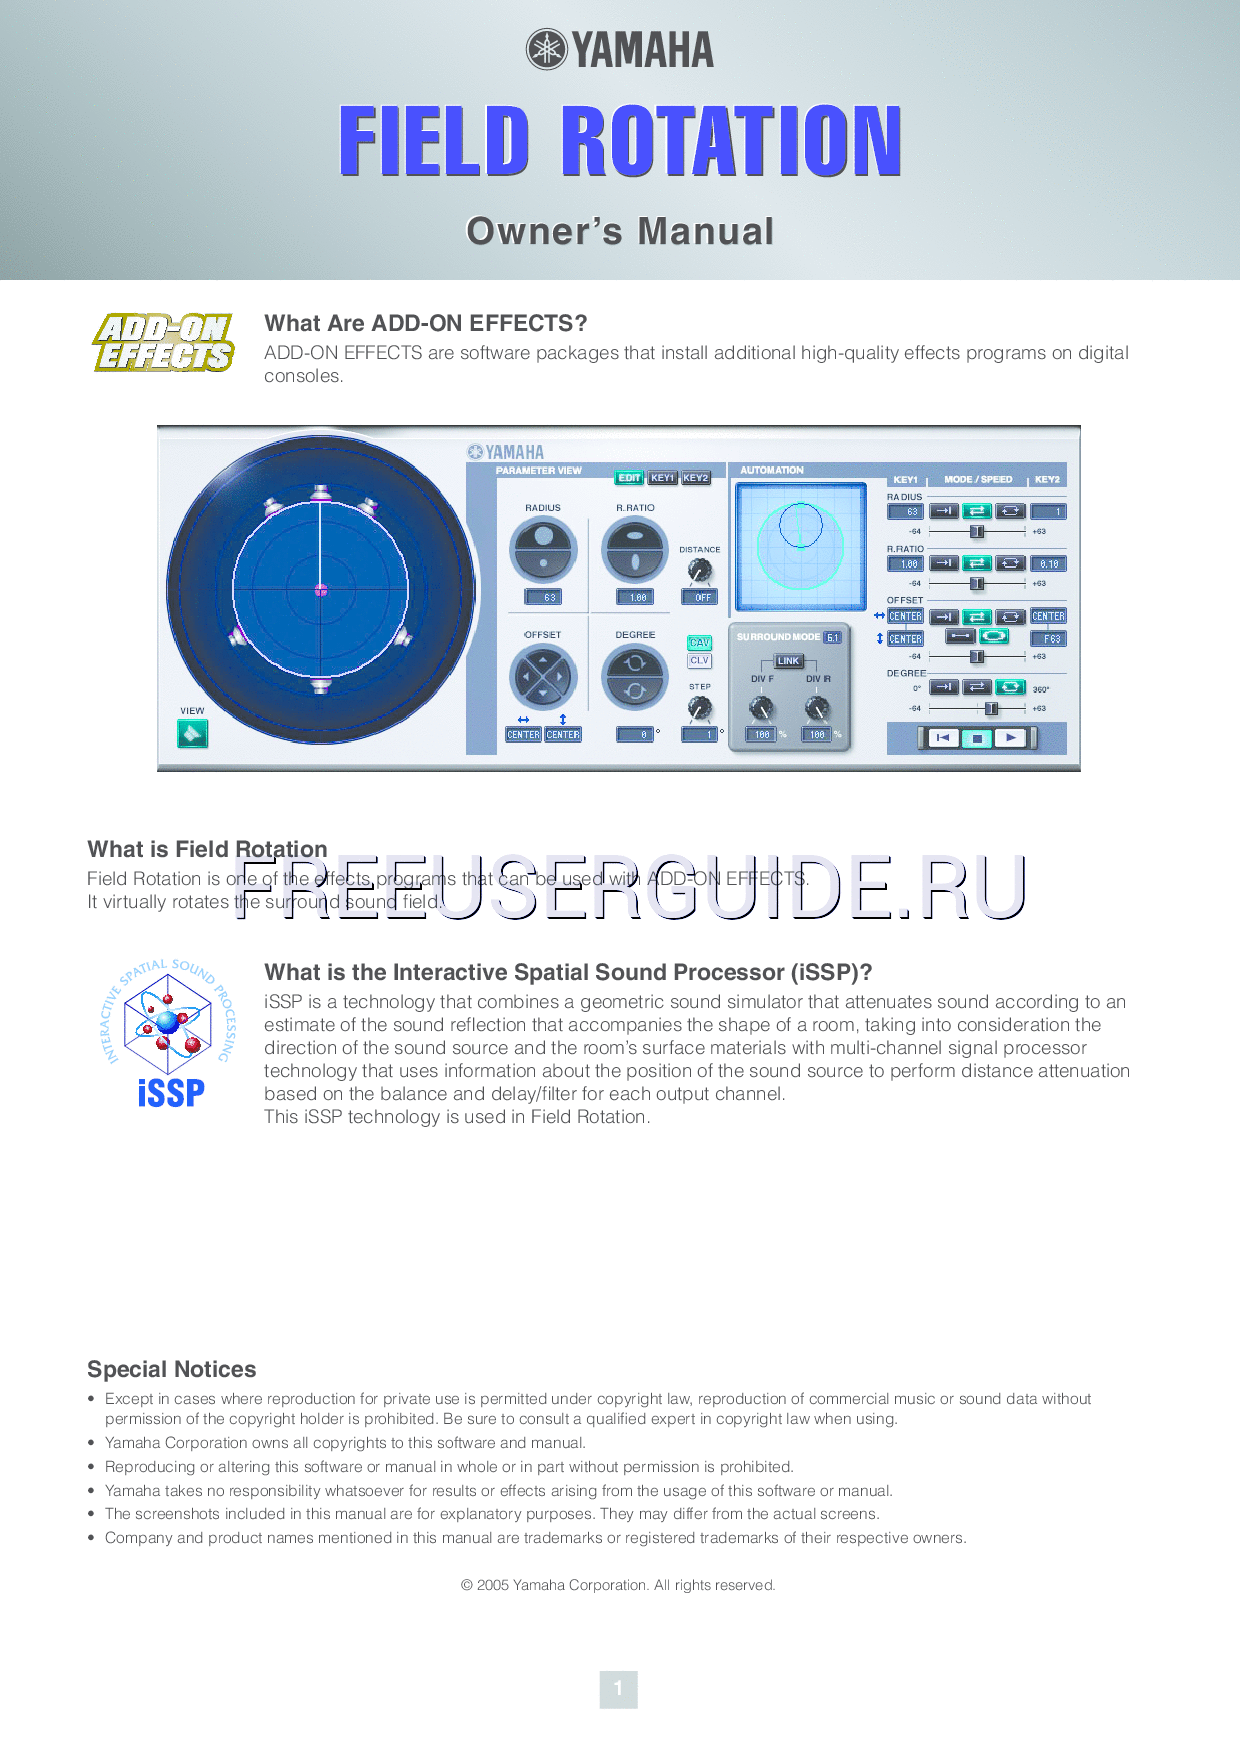 Read online Owner's Manual for Yamaha Add-On Effects (AE041) Field Rotation (Page 1)